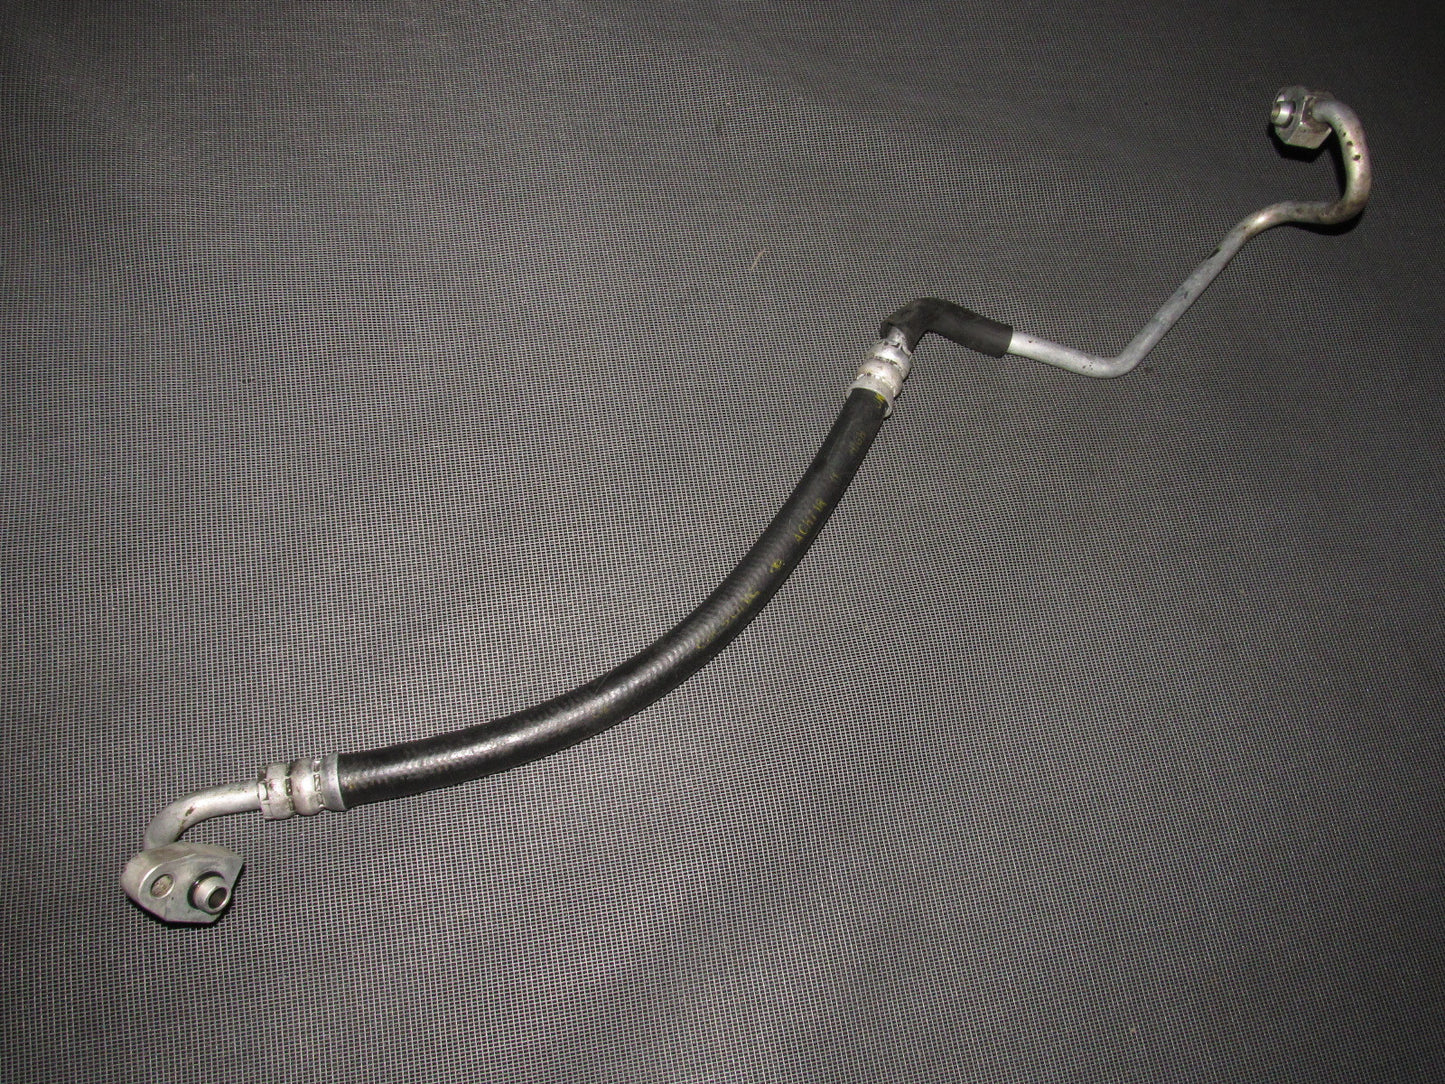 91 92 93 94 Nissan 240SX OEM Air Condition A/C Fitting Hose